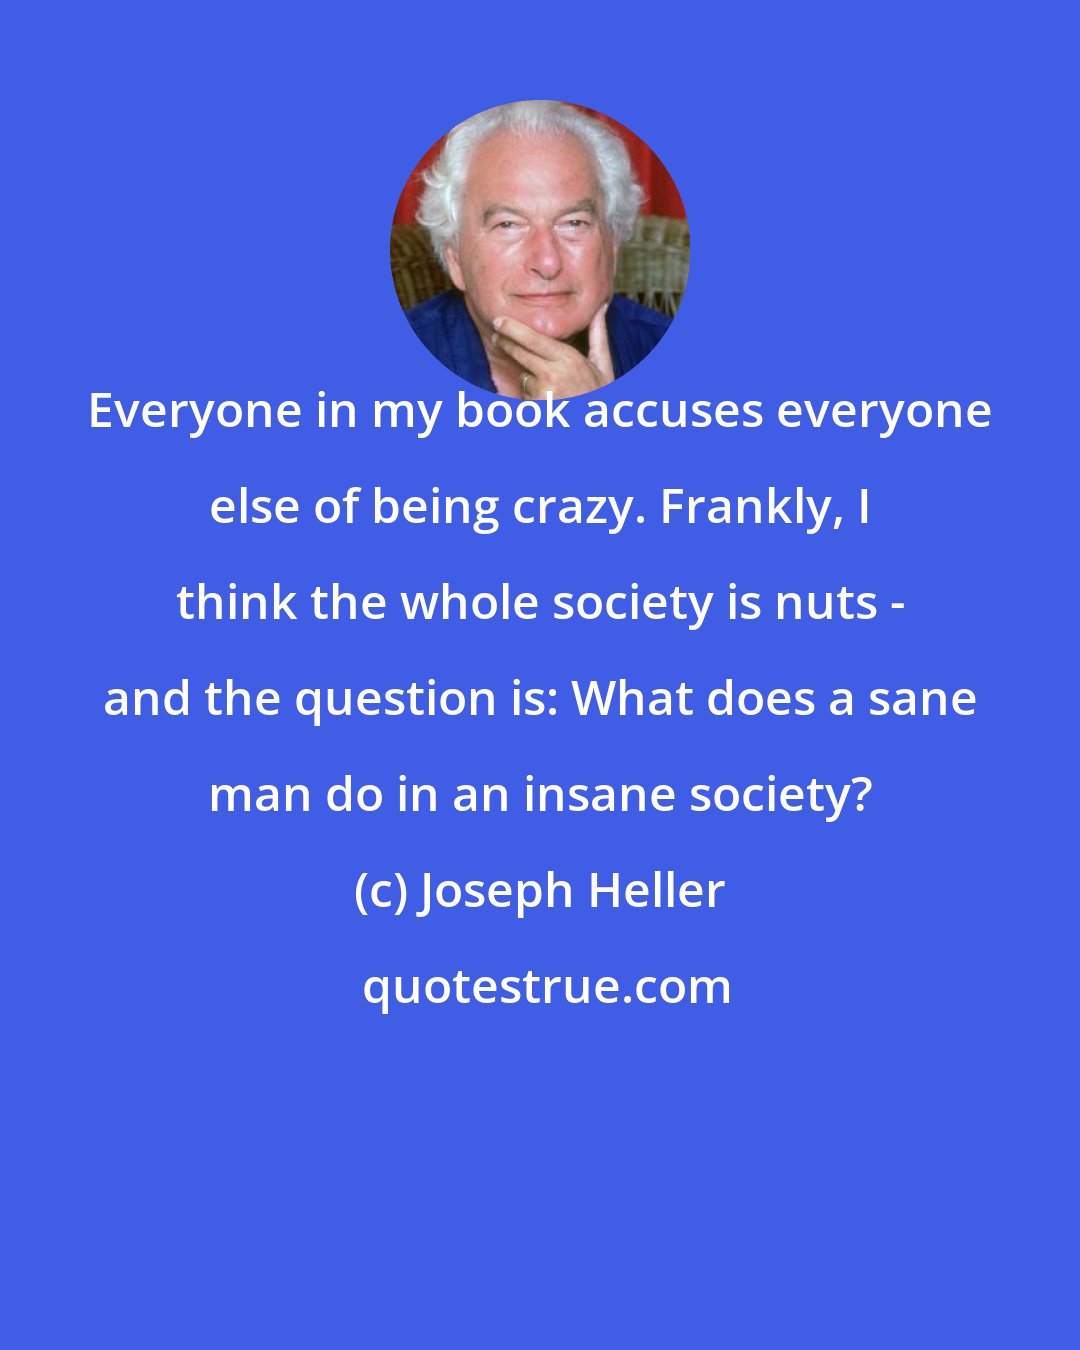 Joseph Heller: Everyone in my book accuses everyone else of being crazy. Frankly, I think the whole society is nuts - and the question is: What does a sane man do in an insane society?